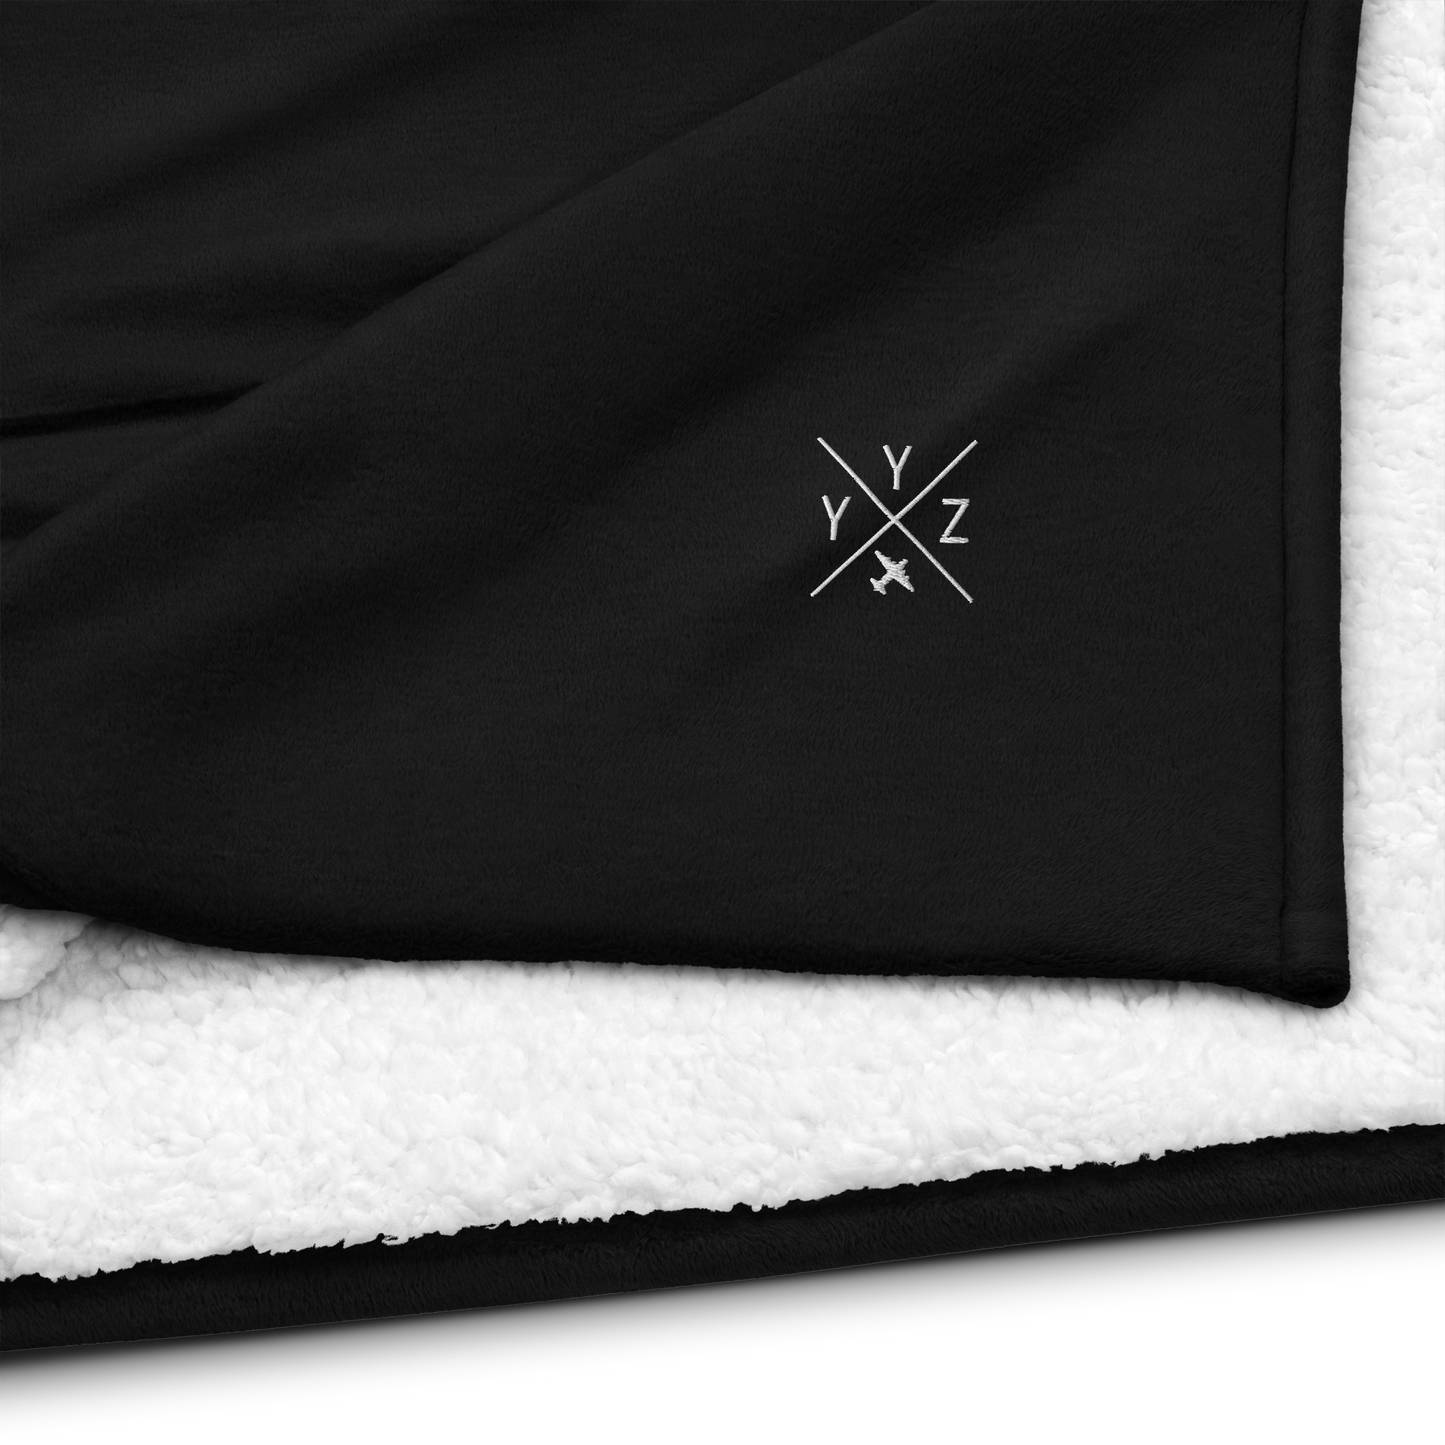 YHM Designs - YYZ Toronto Premium Sherpa Blanket - Crossed-X Design with Airport Code and Vintage Propliner - White Embroidery - Image 03